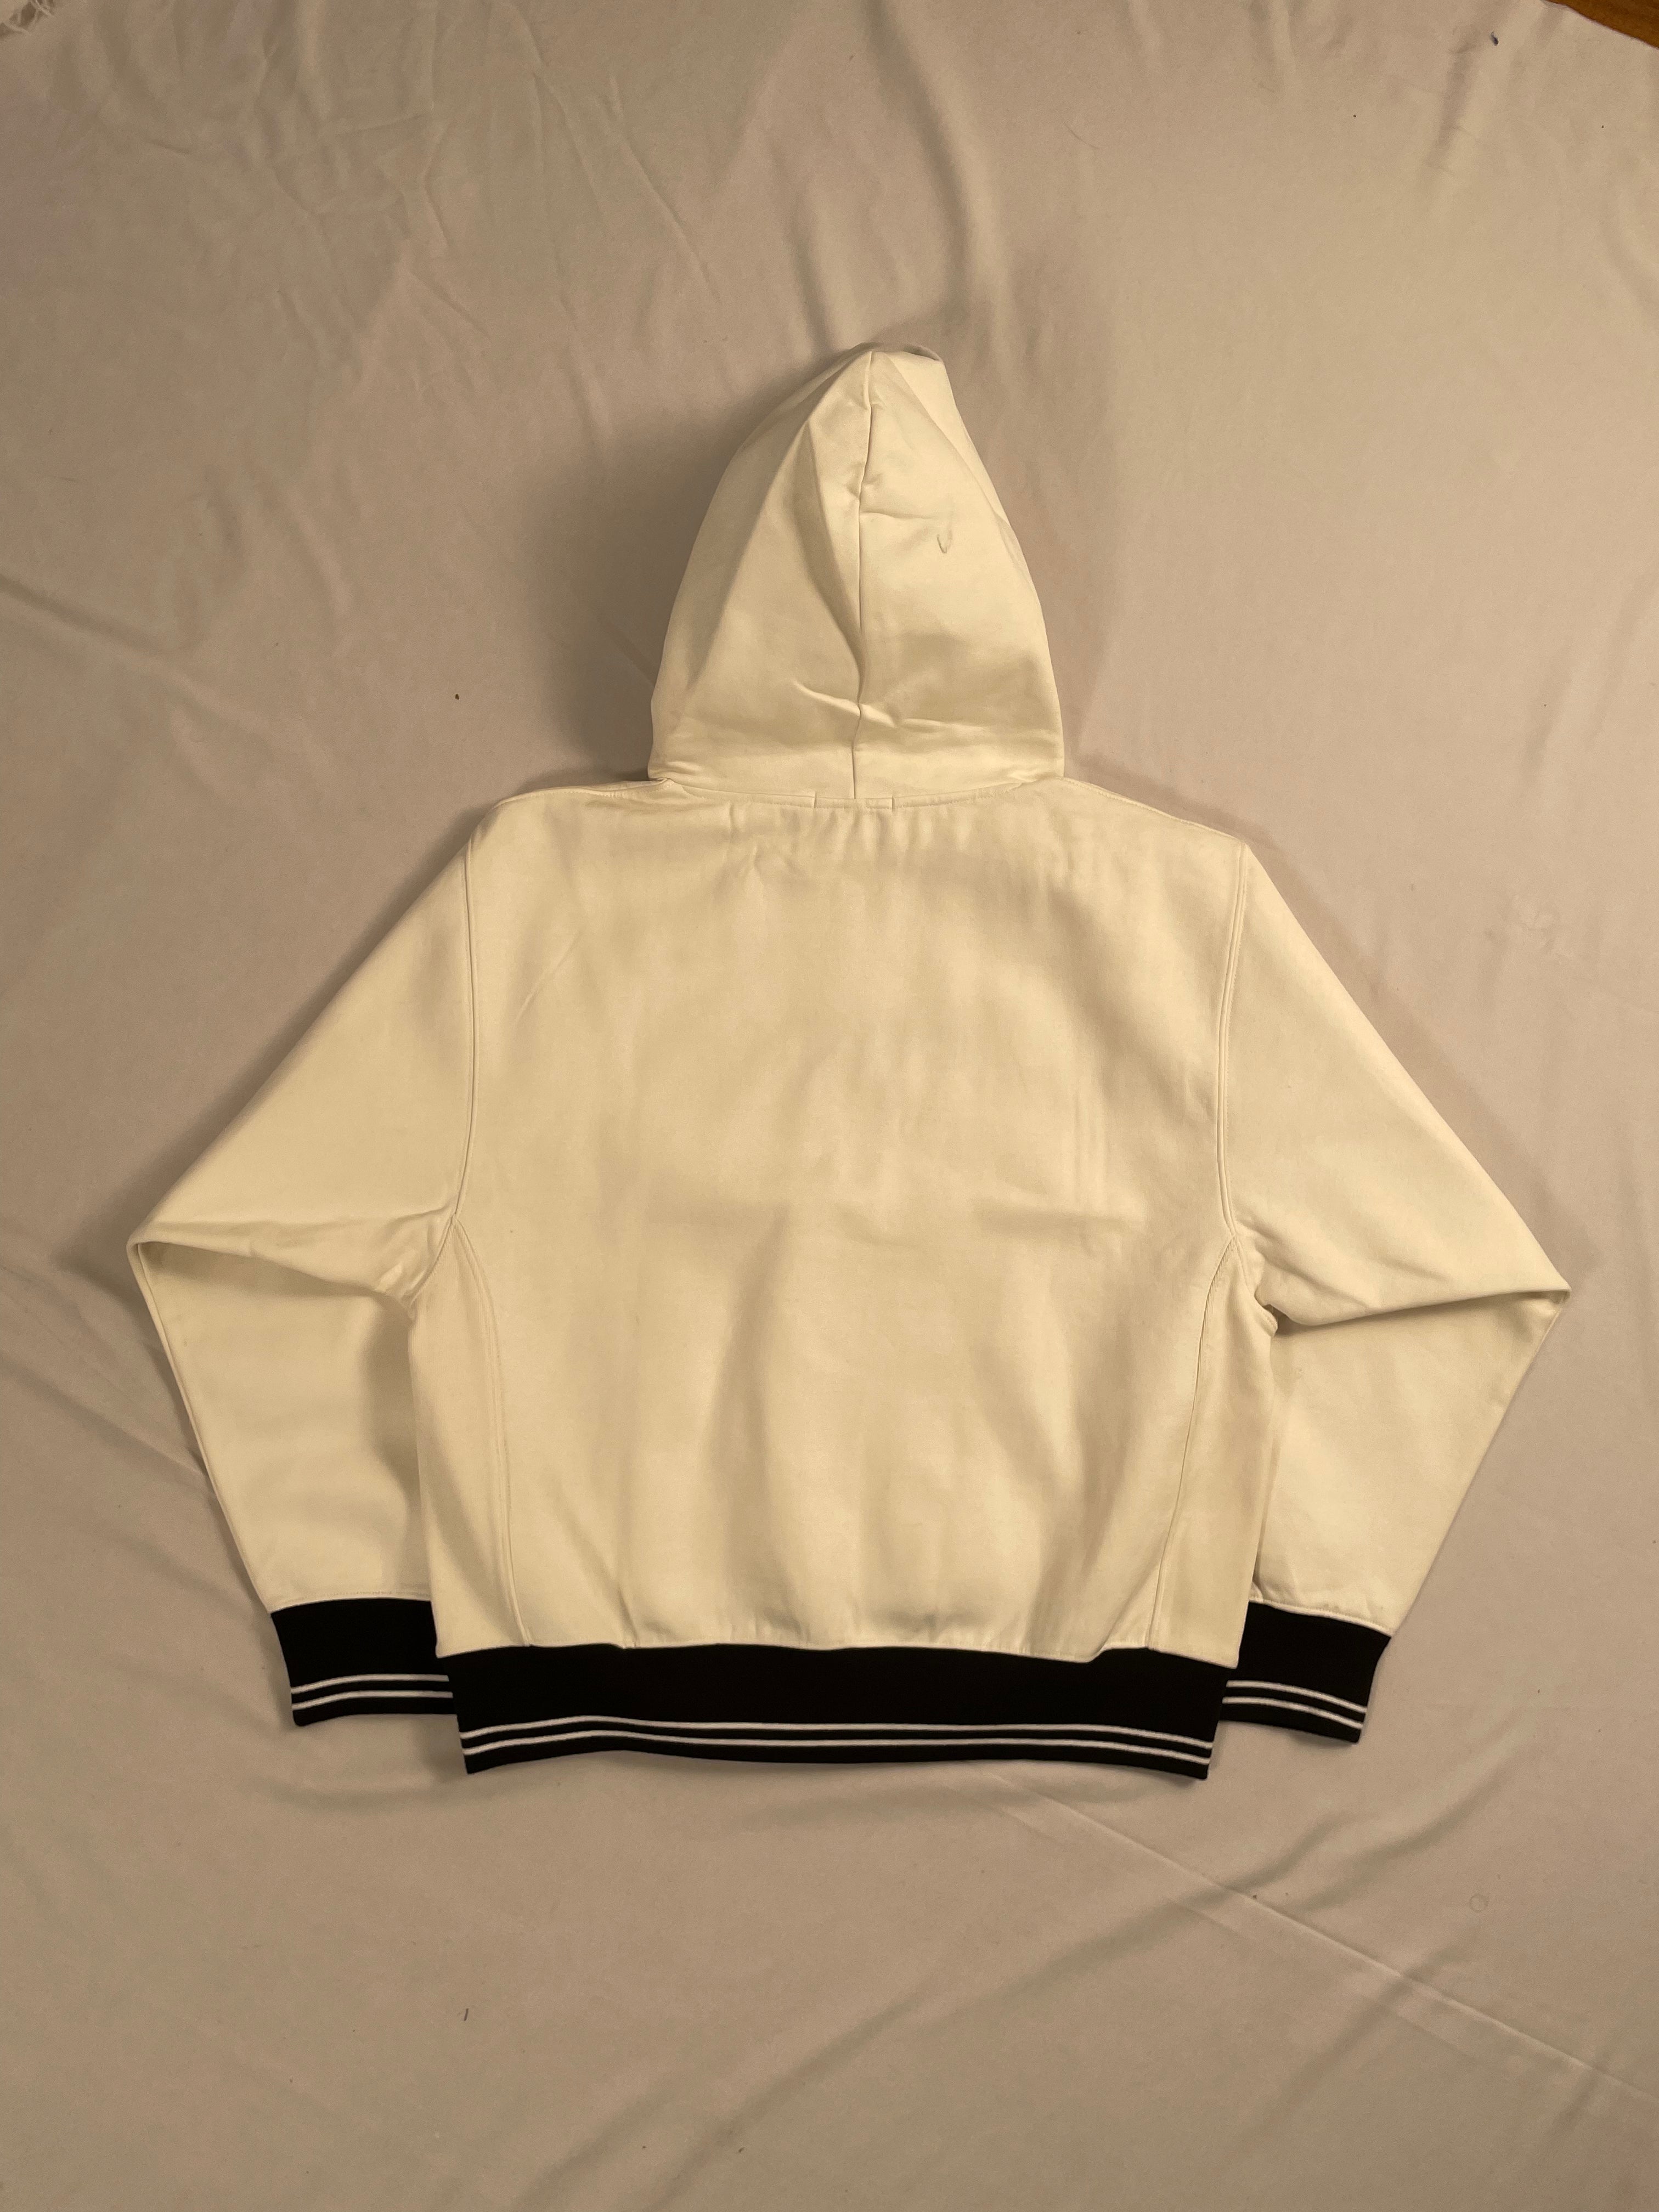 OBEY White Hoodie